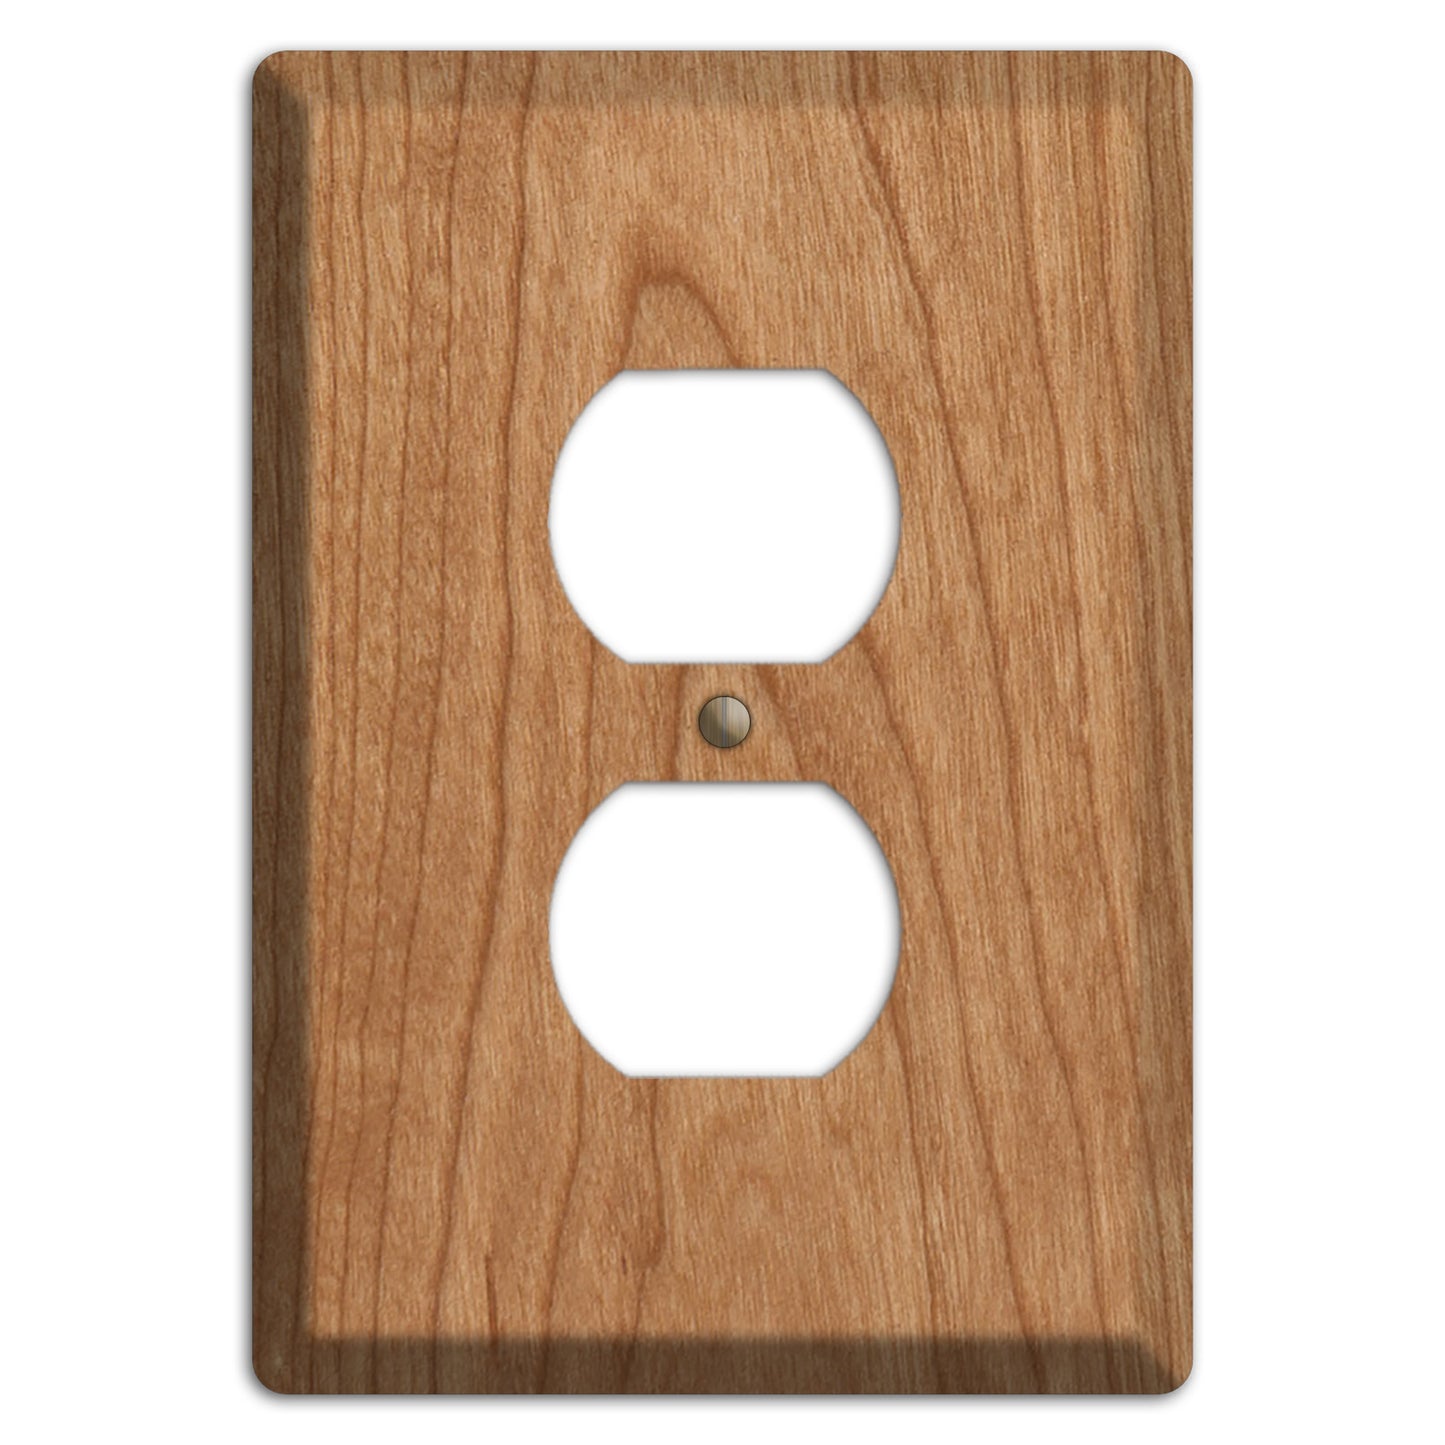 Unfinished Cherry Wood Duplex Outlet Cover Plate